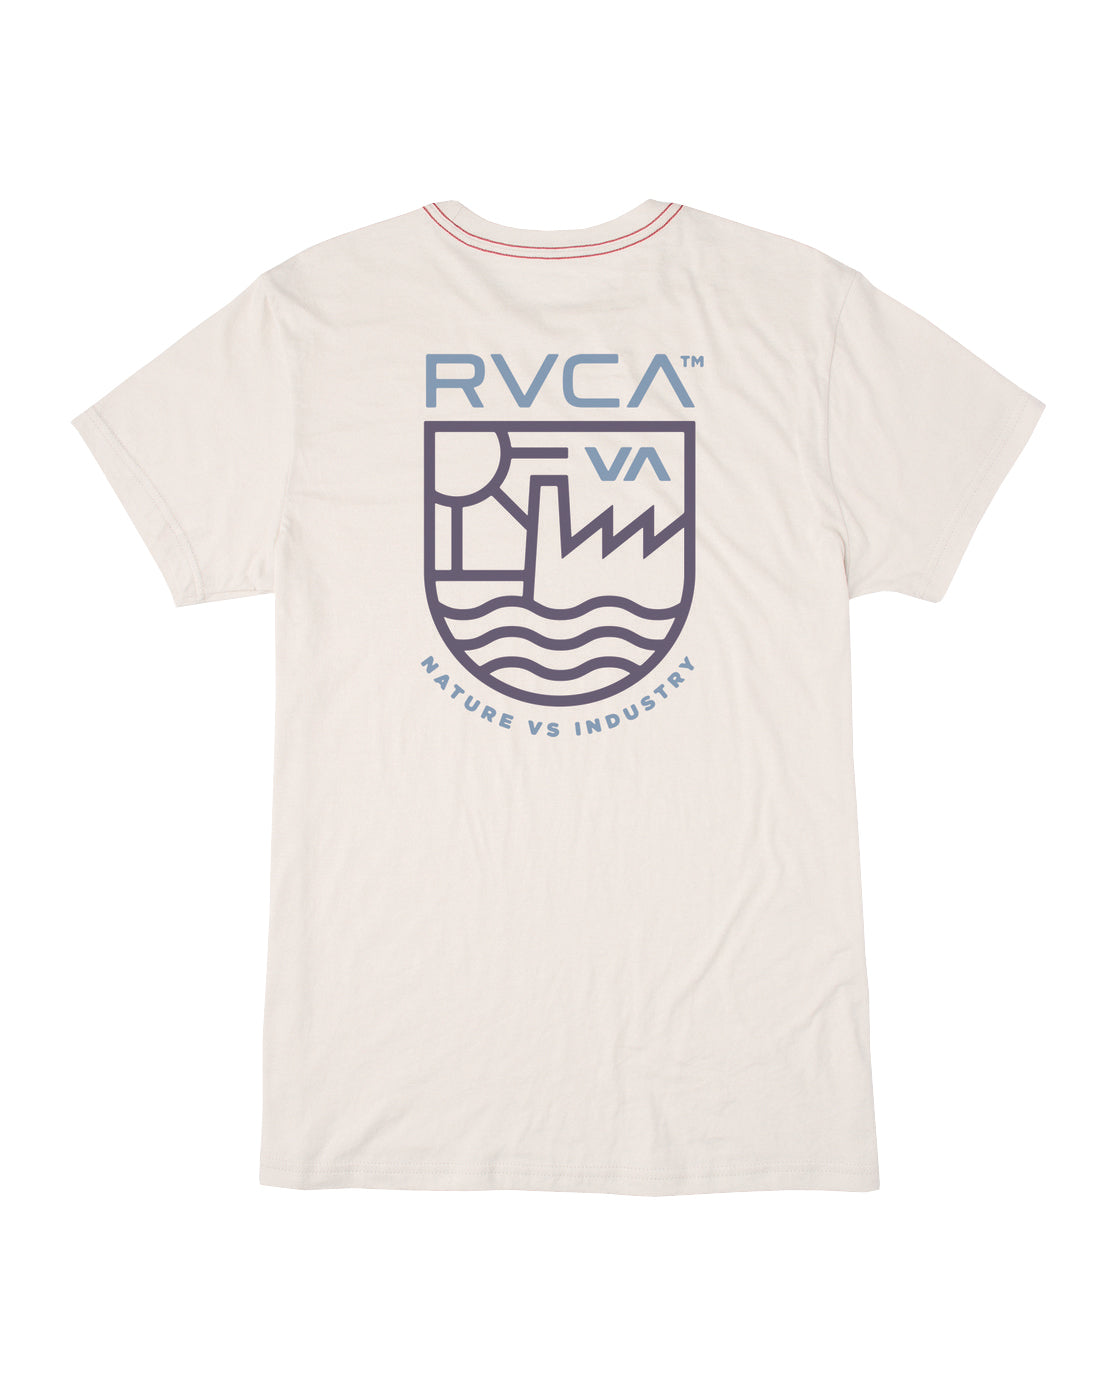 RVCA Dept of Ind SS Tee ANW M